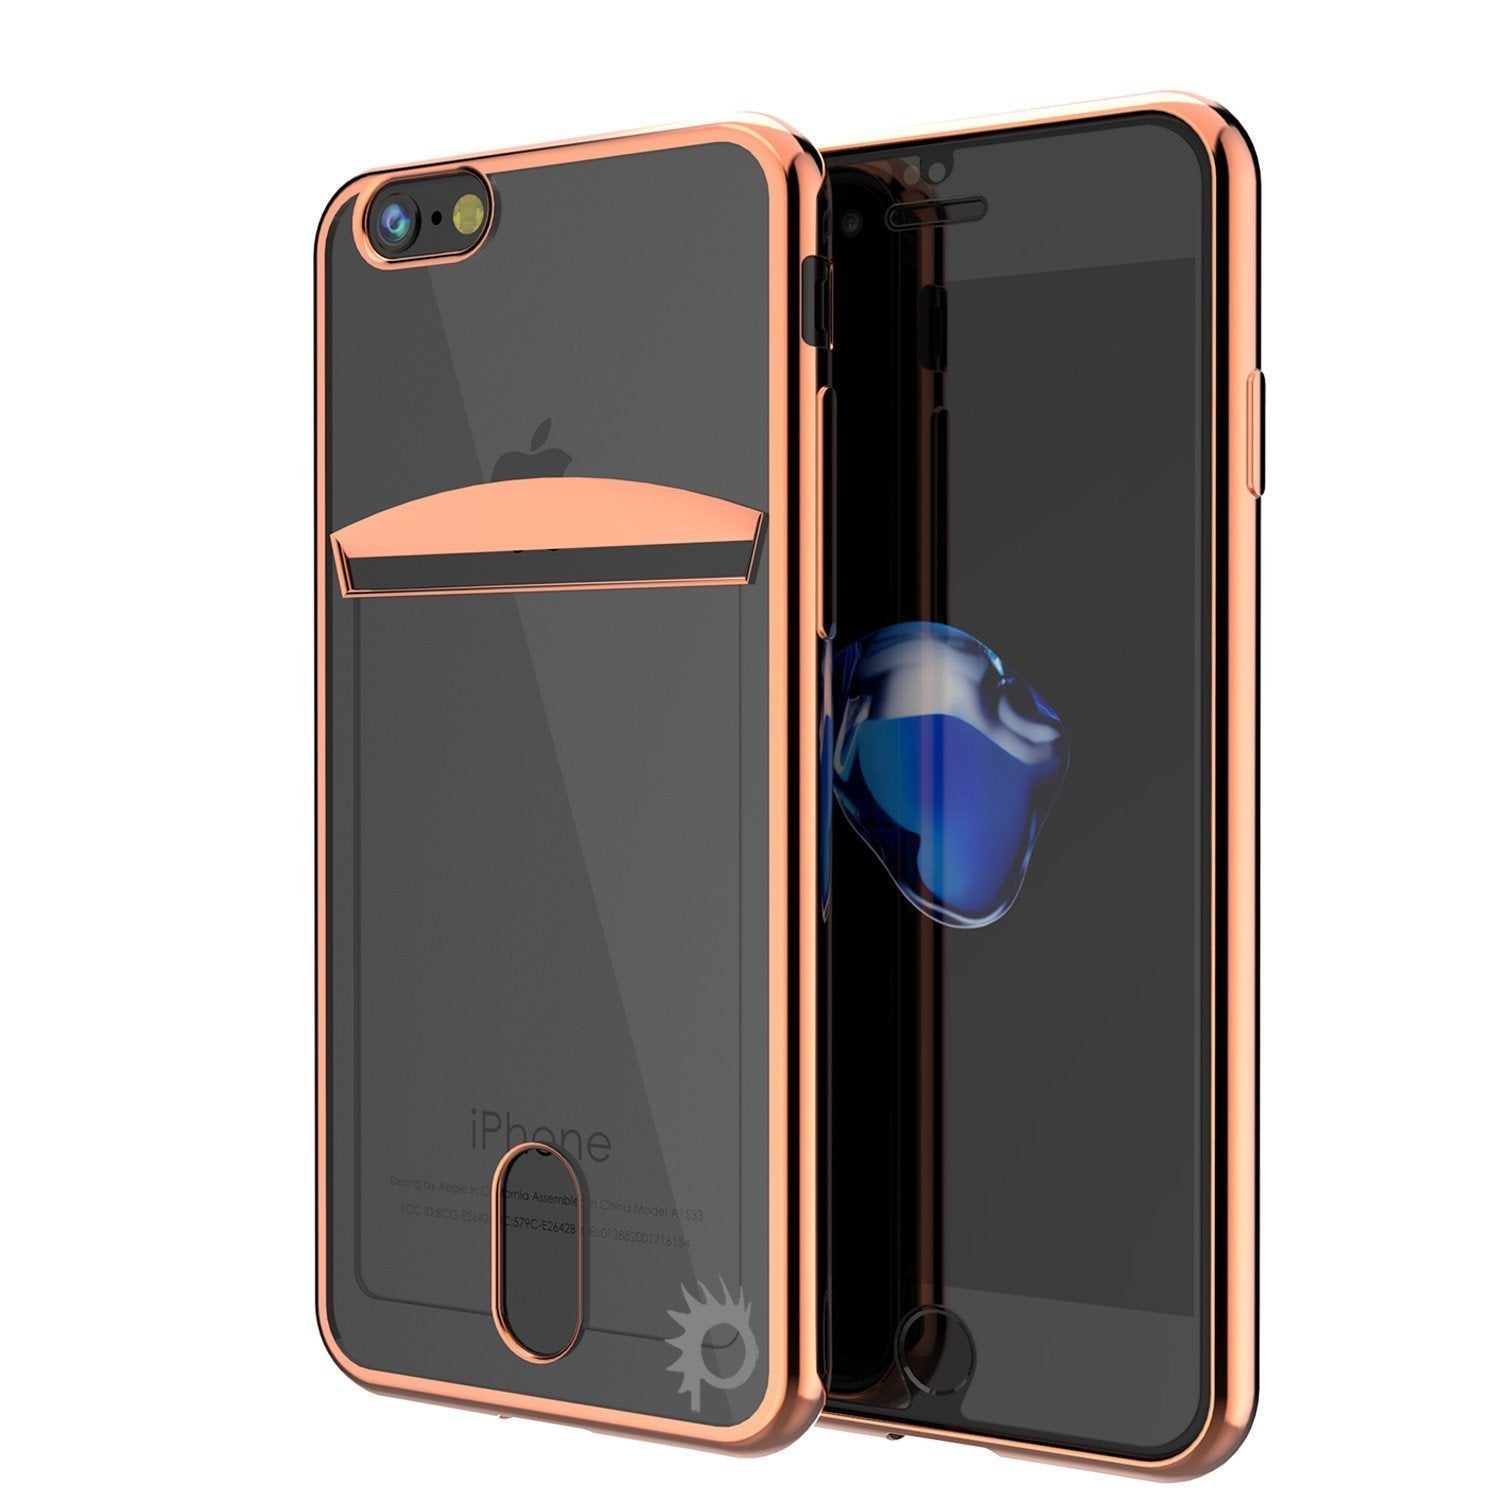 iPhone SE (4.7") Case, PUNKCASE® LUCID Rose Gold Series | Card Slot | SHIELD Screen Protector | Ultra fit (Color in image: Rose Gold)